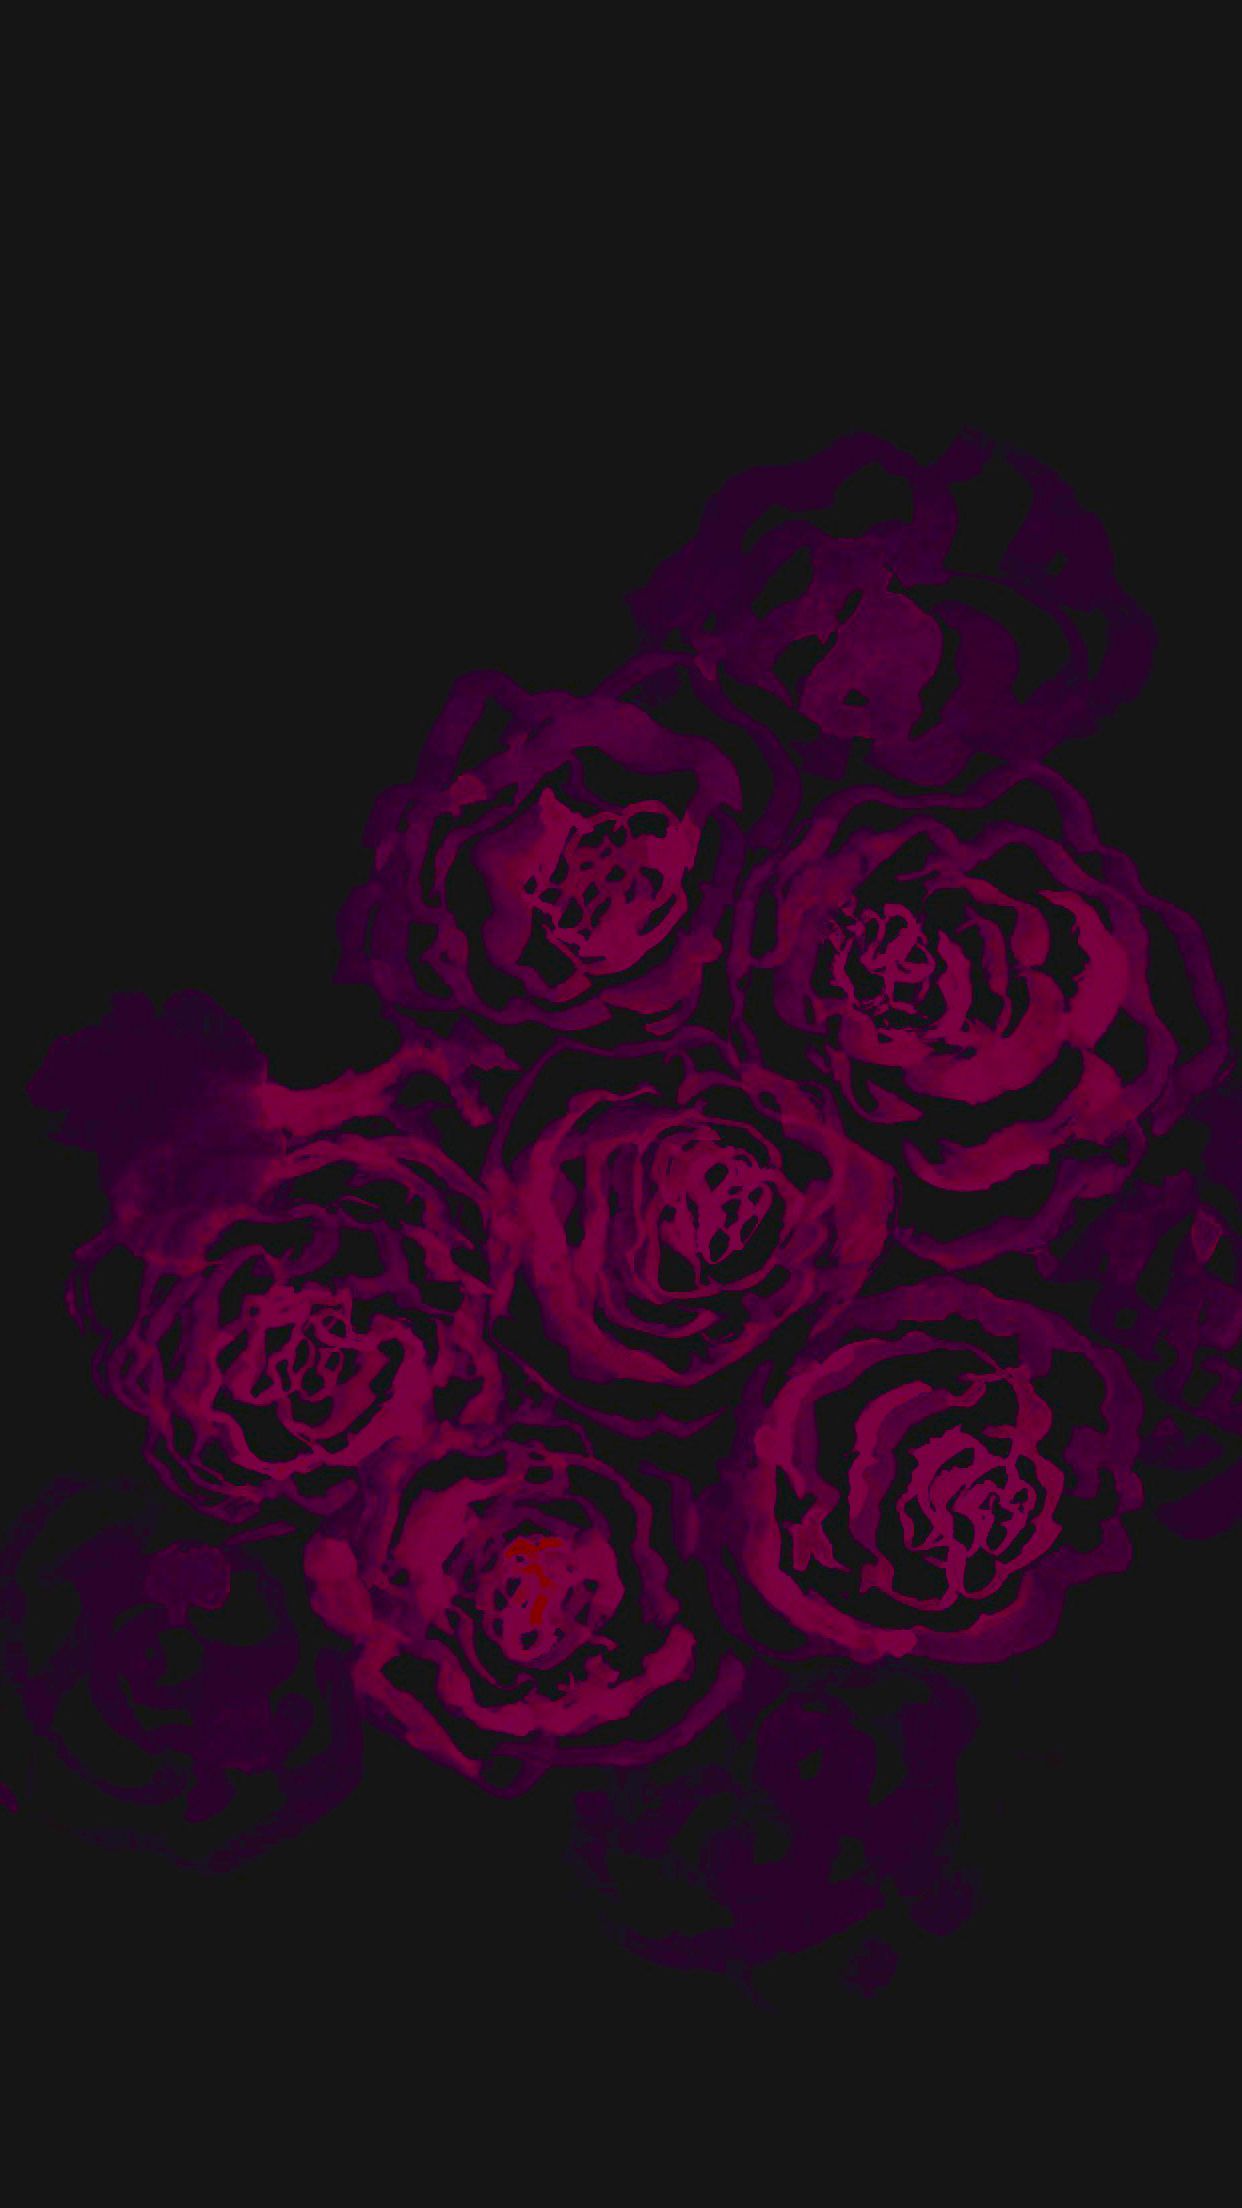 Red Rose IPhone Wallpaper (82+ images)